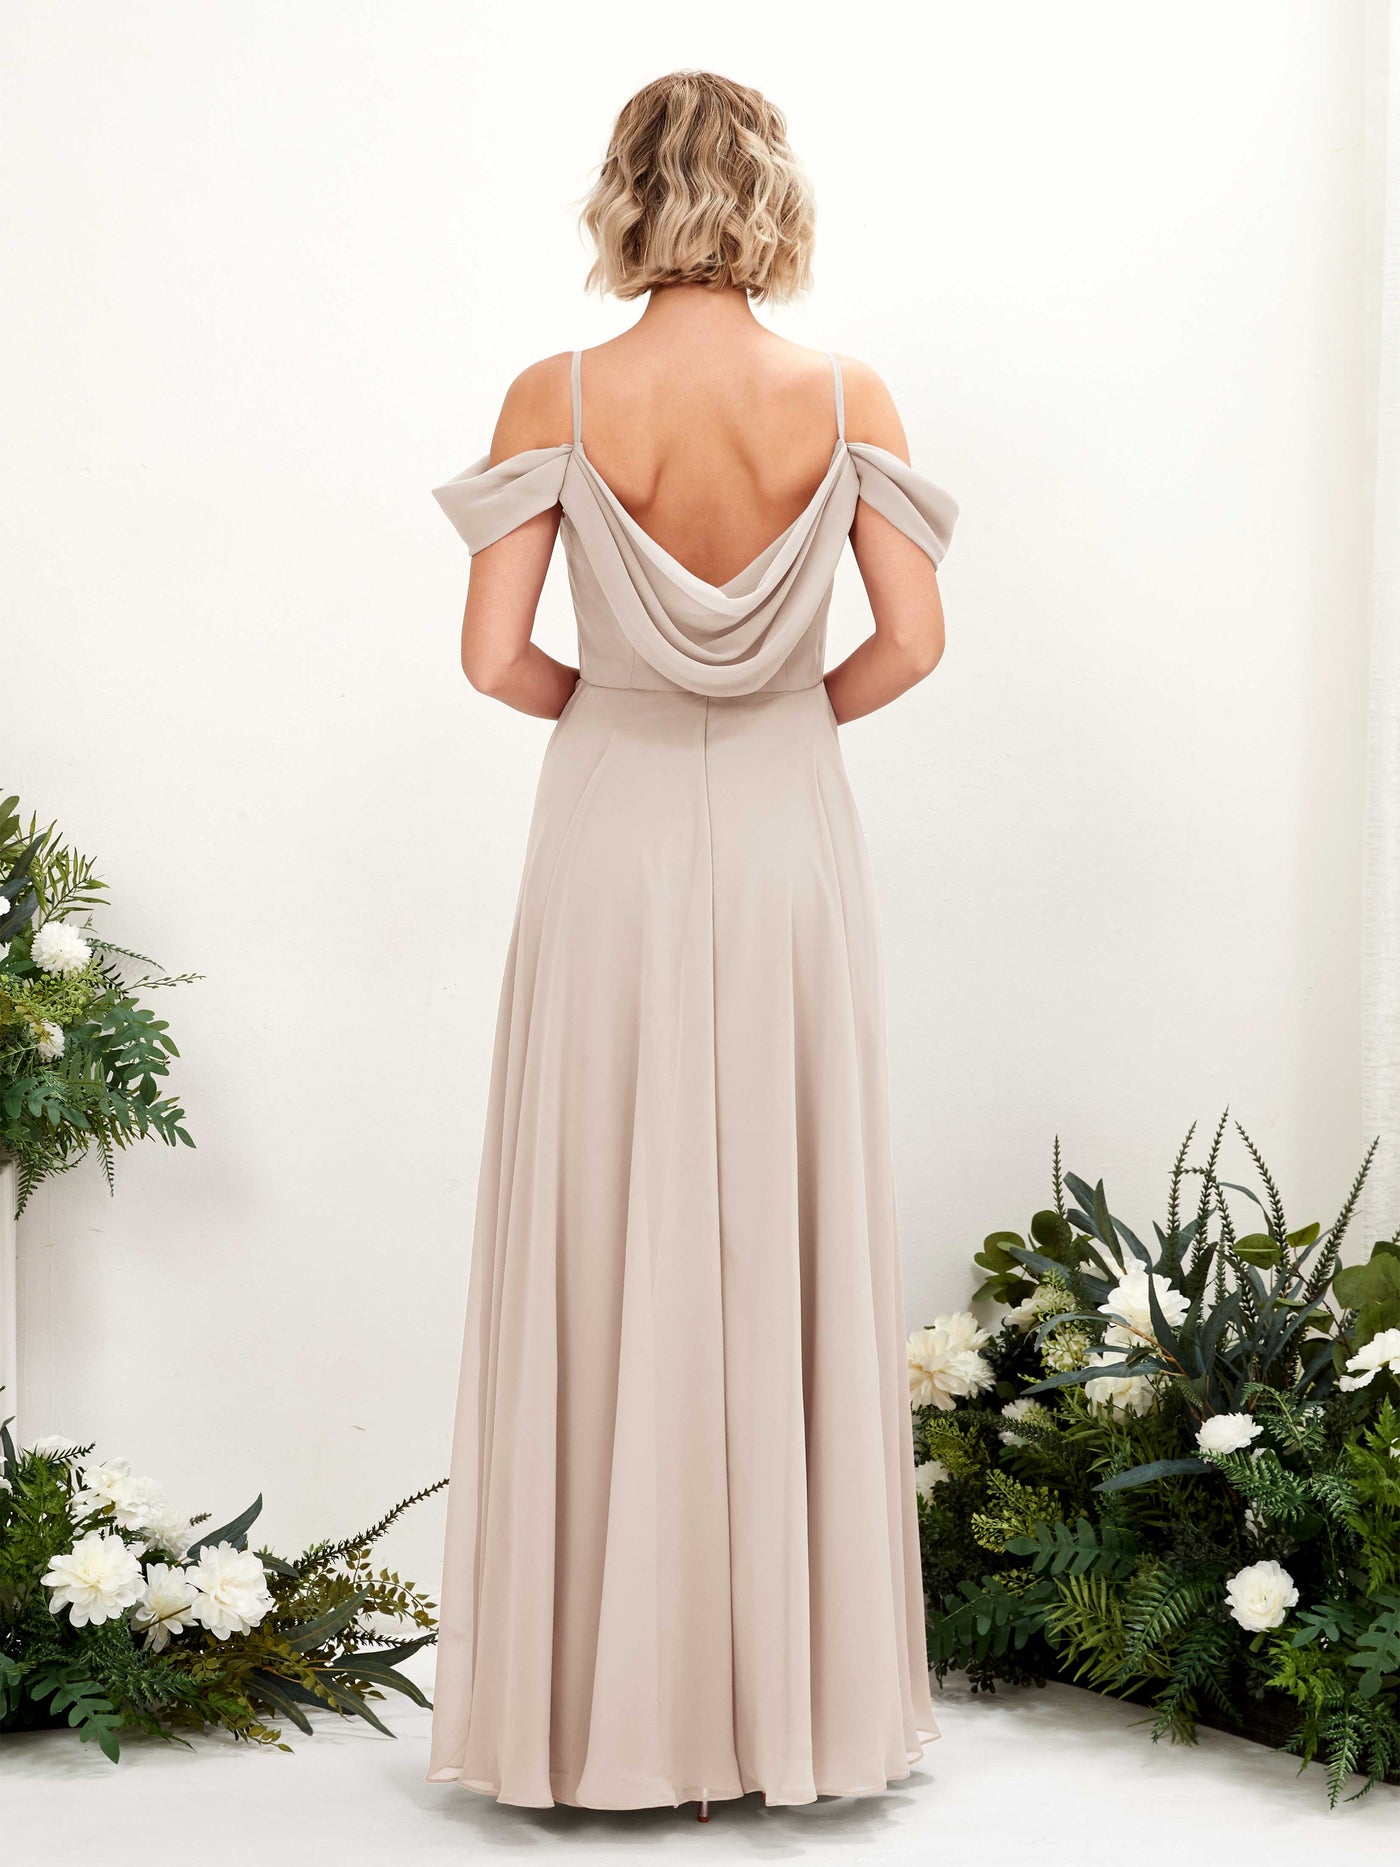 Champagne Bridesmaid Dresses Bridesmaid Dress A-line Chiffon Off Shoulder Full Length Sleeveless Wedding Party Dress (81224916)#color_champagne